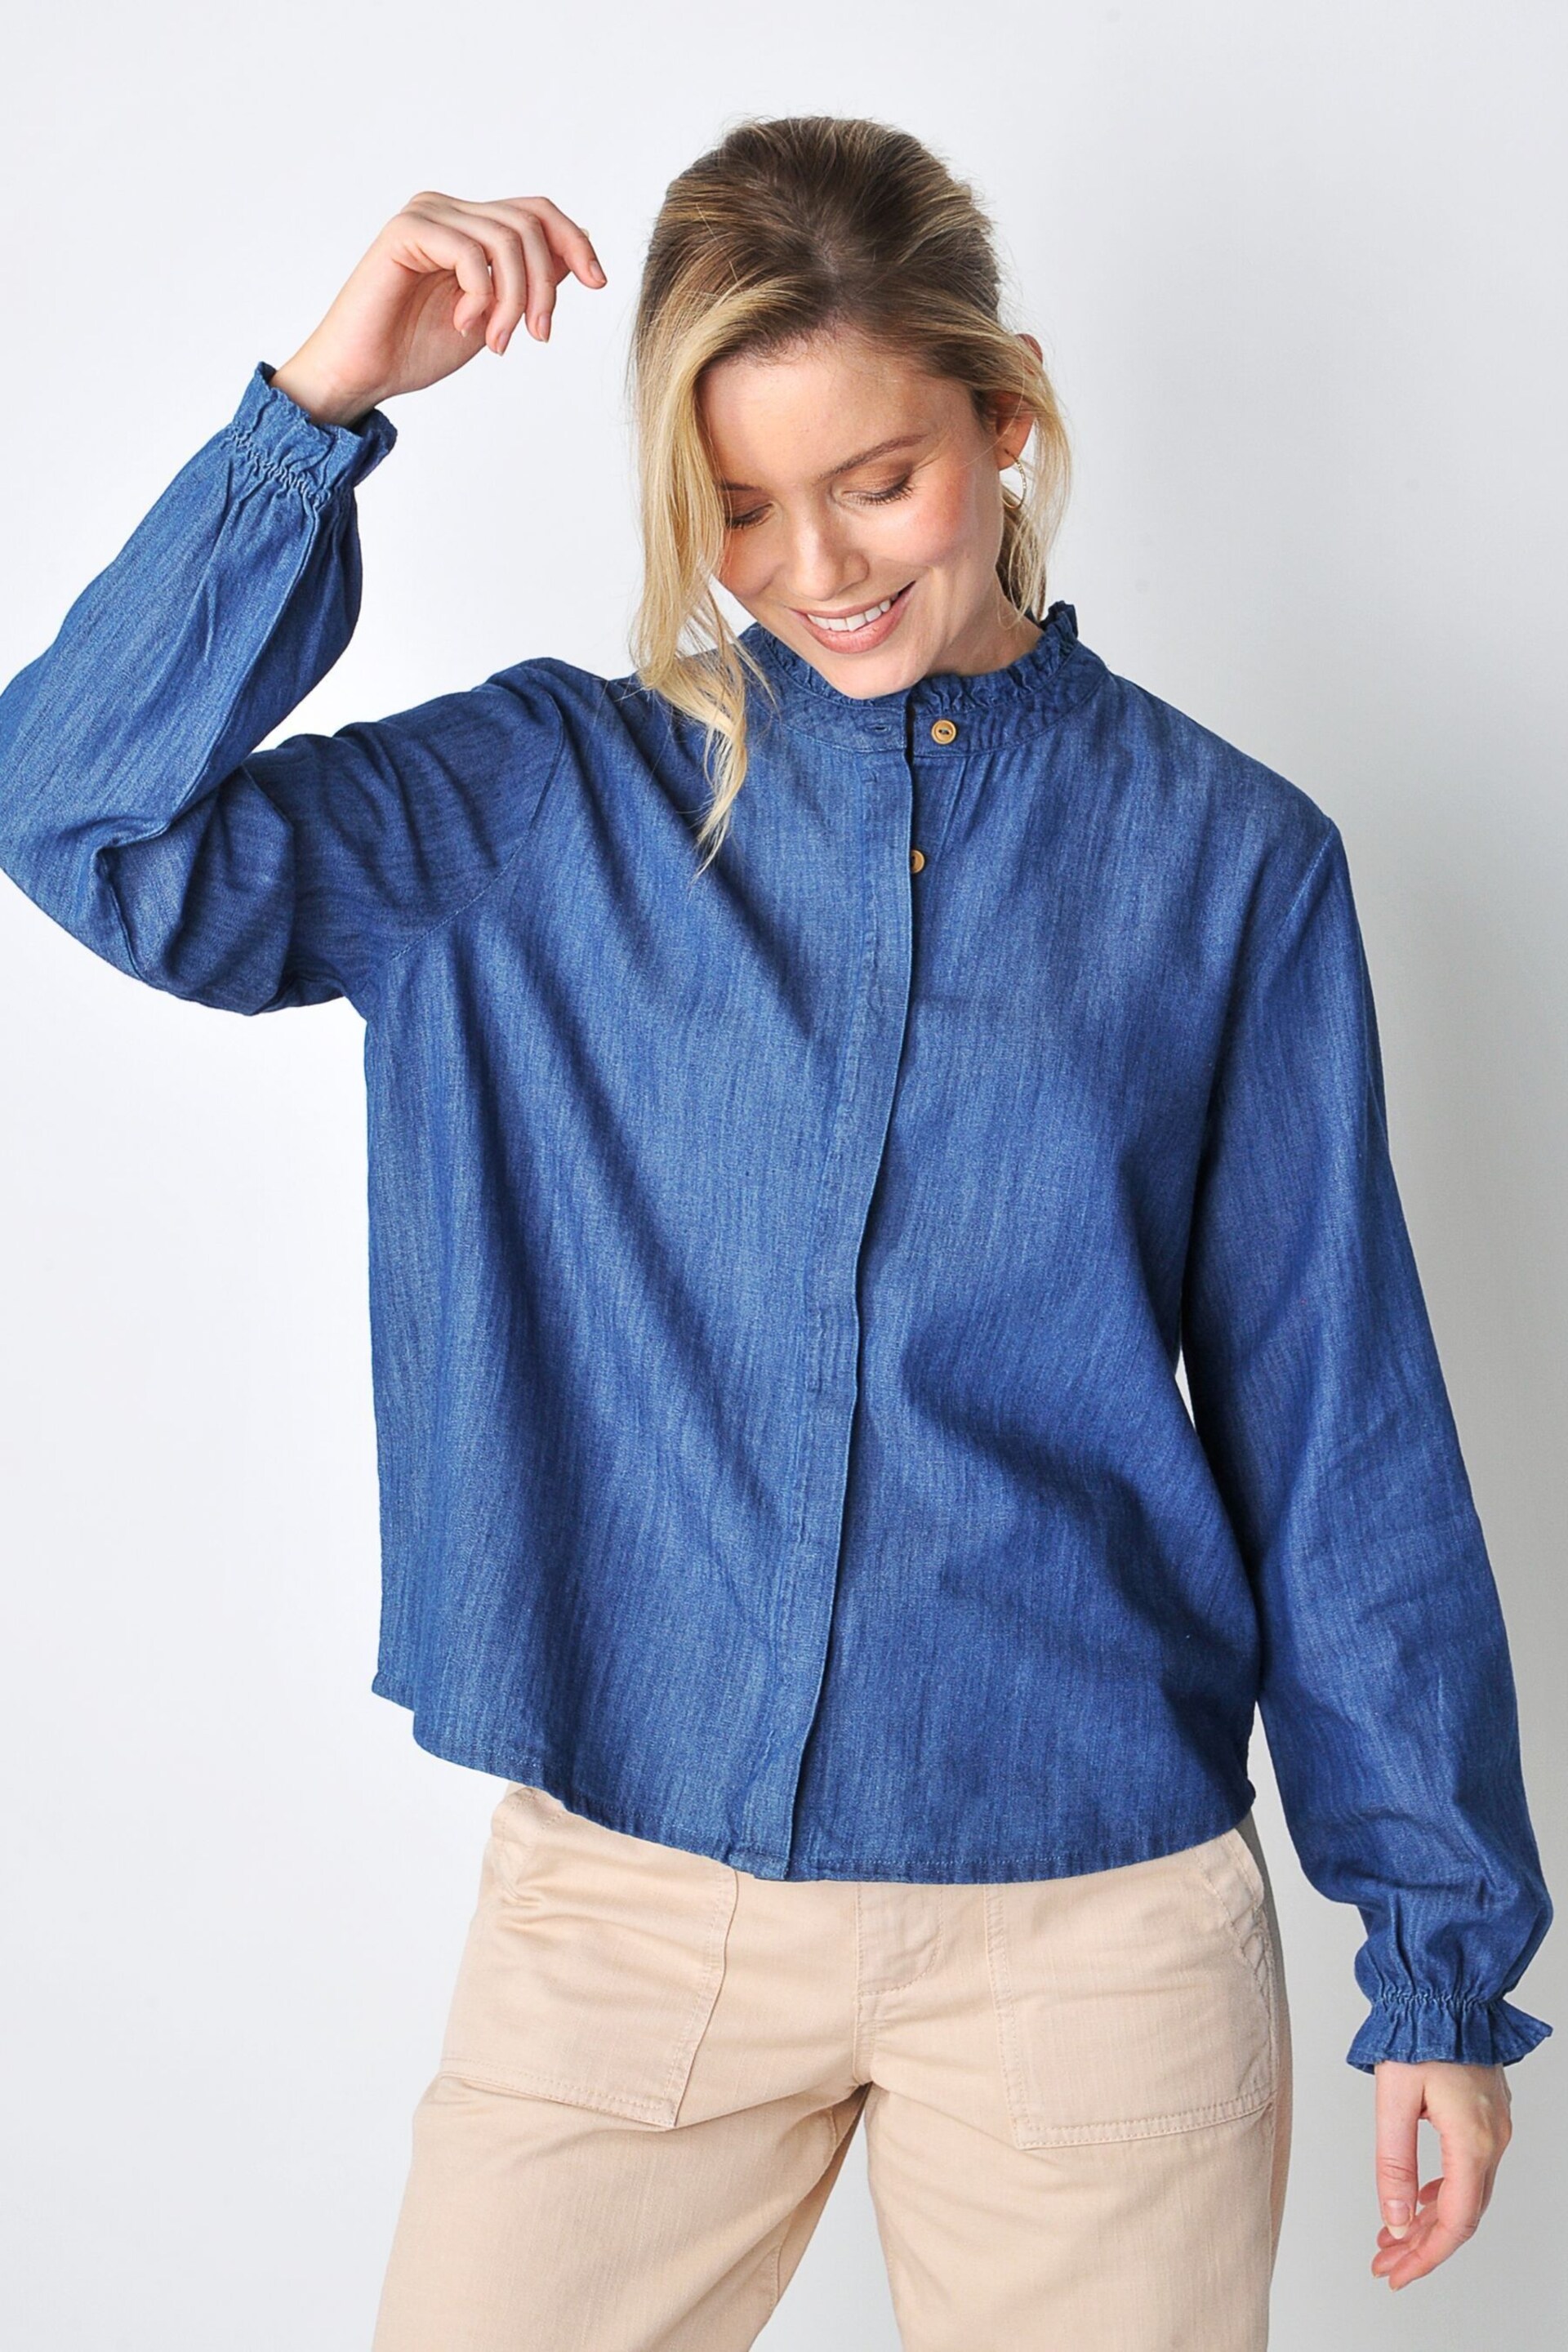 Burgs Womens Blue Pannier Frill Long Sleeve Blouses - Image 1 of 5